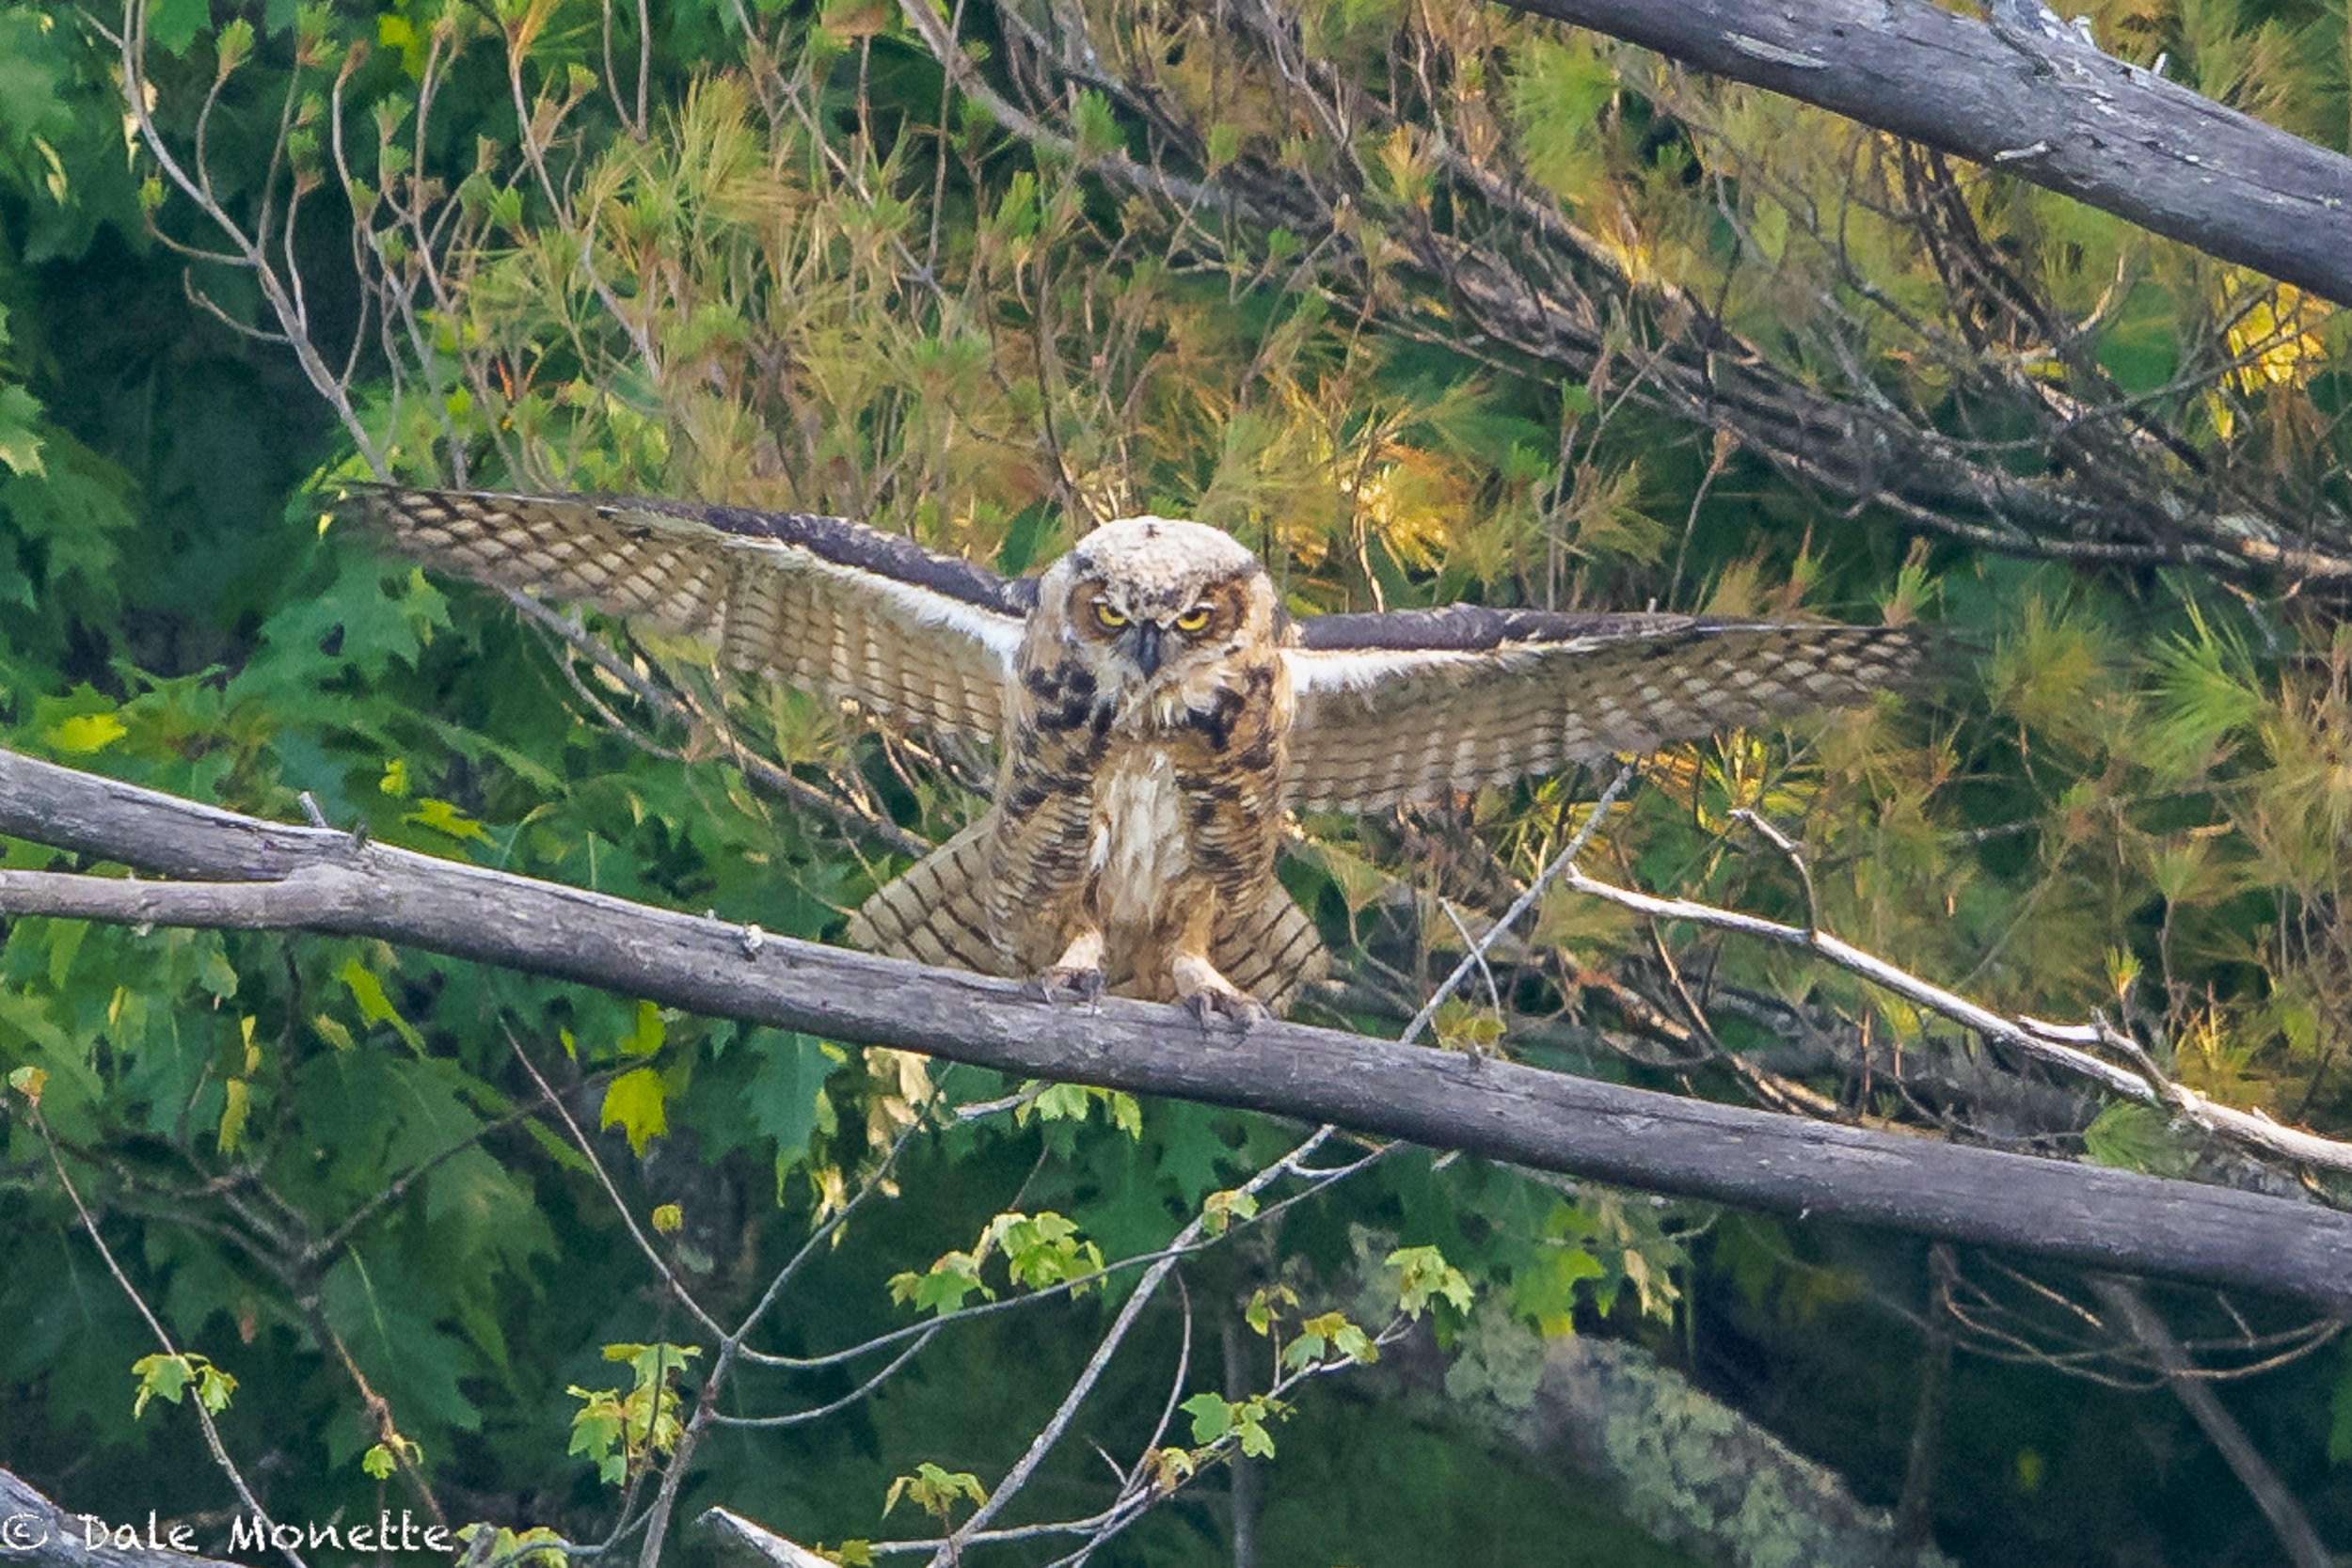   A young great horned owl flashes his wings to a sibling sitting lower down in the neighboring trees.  